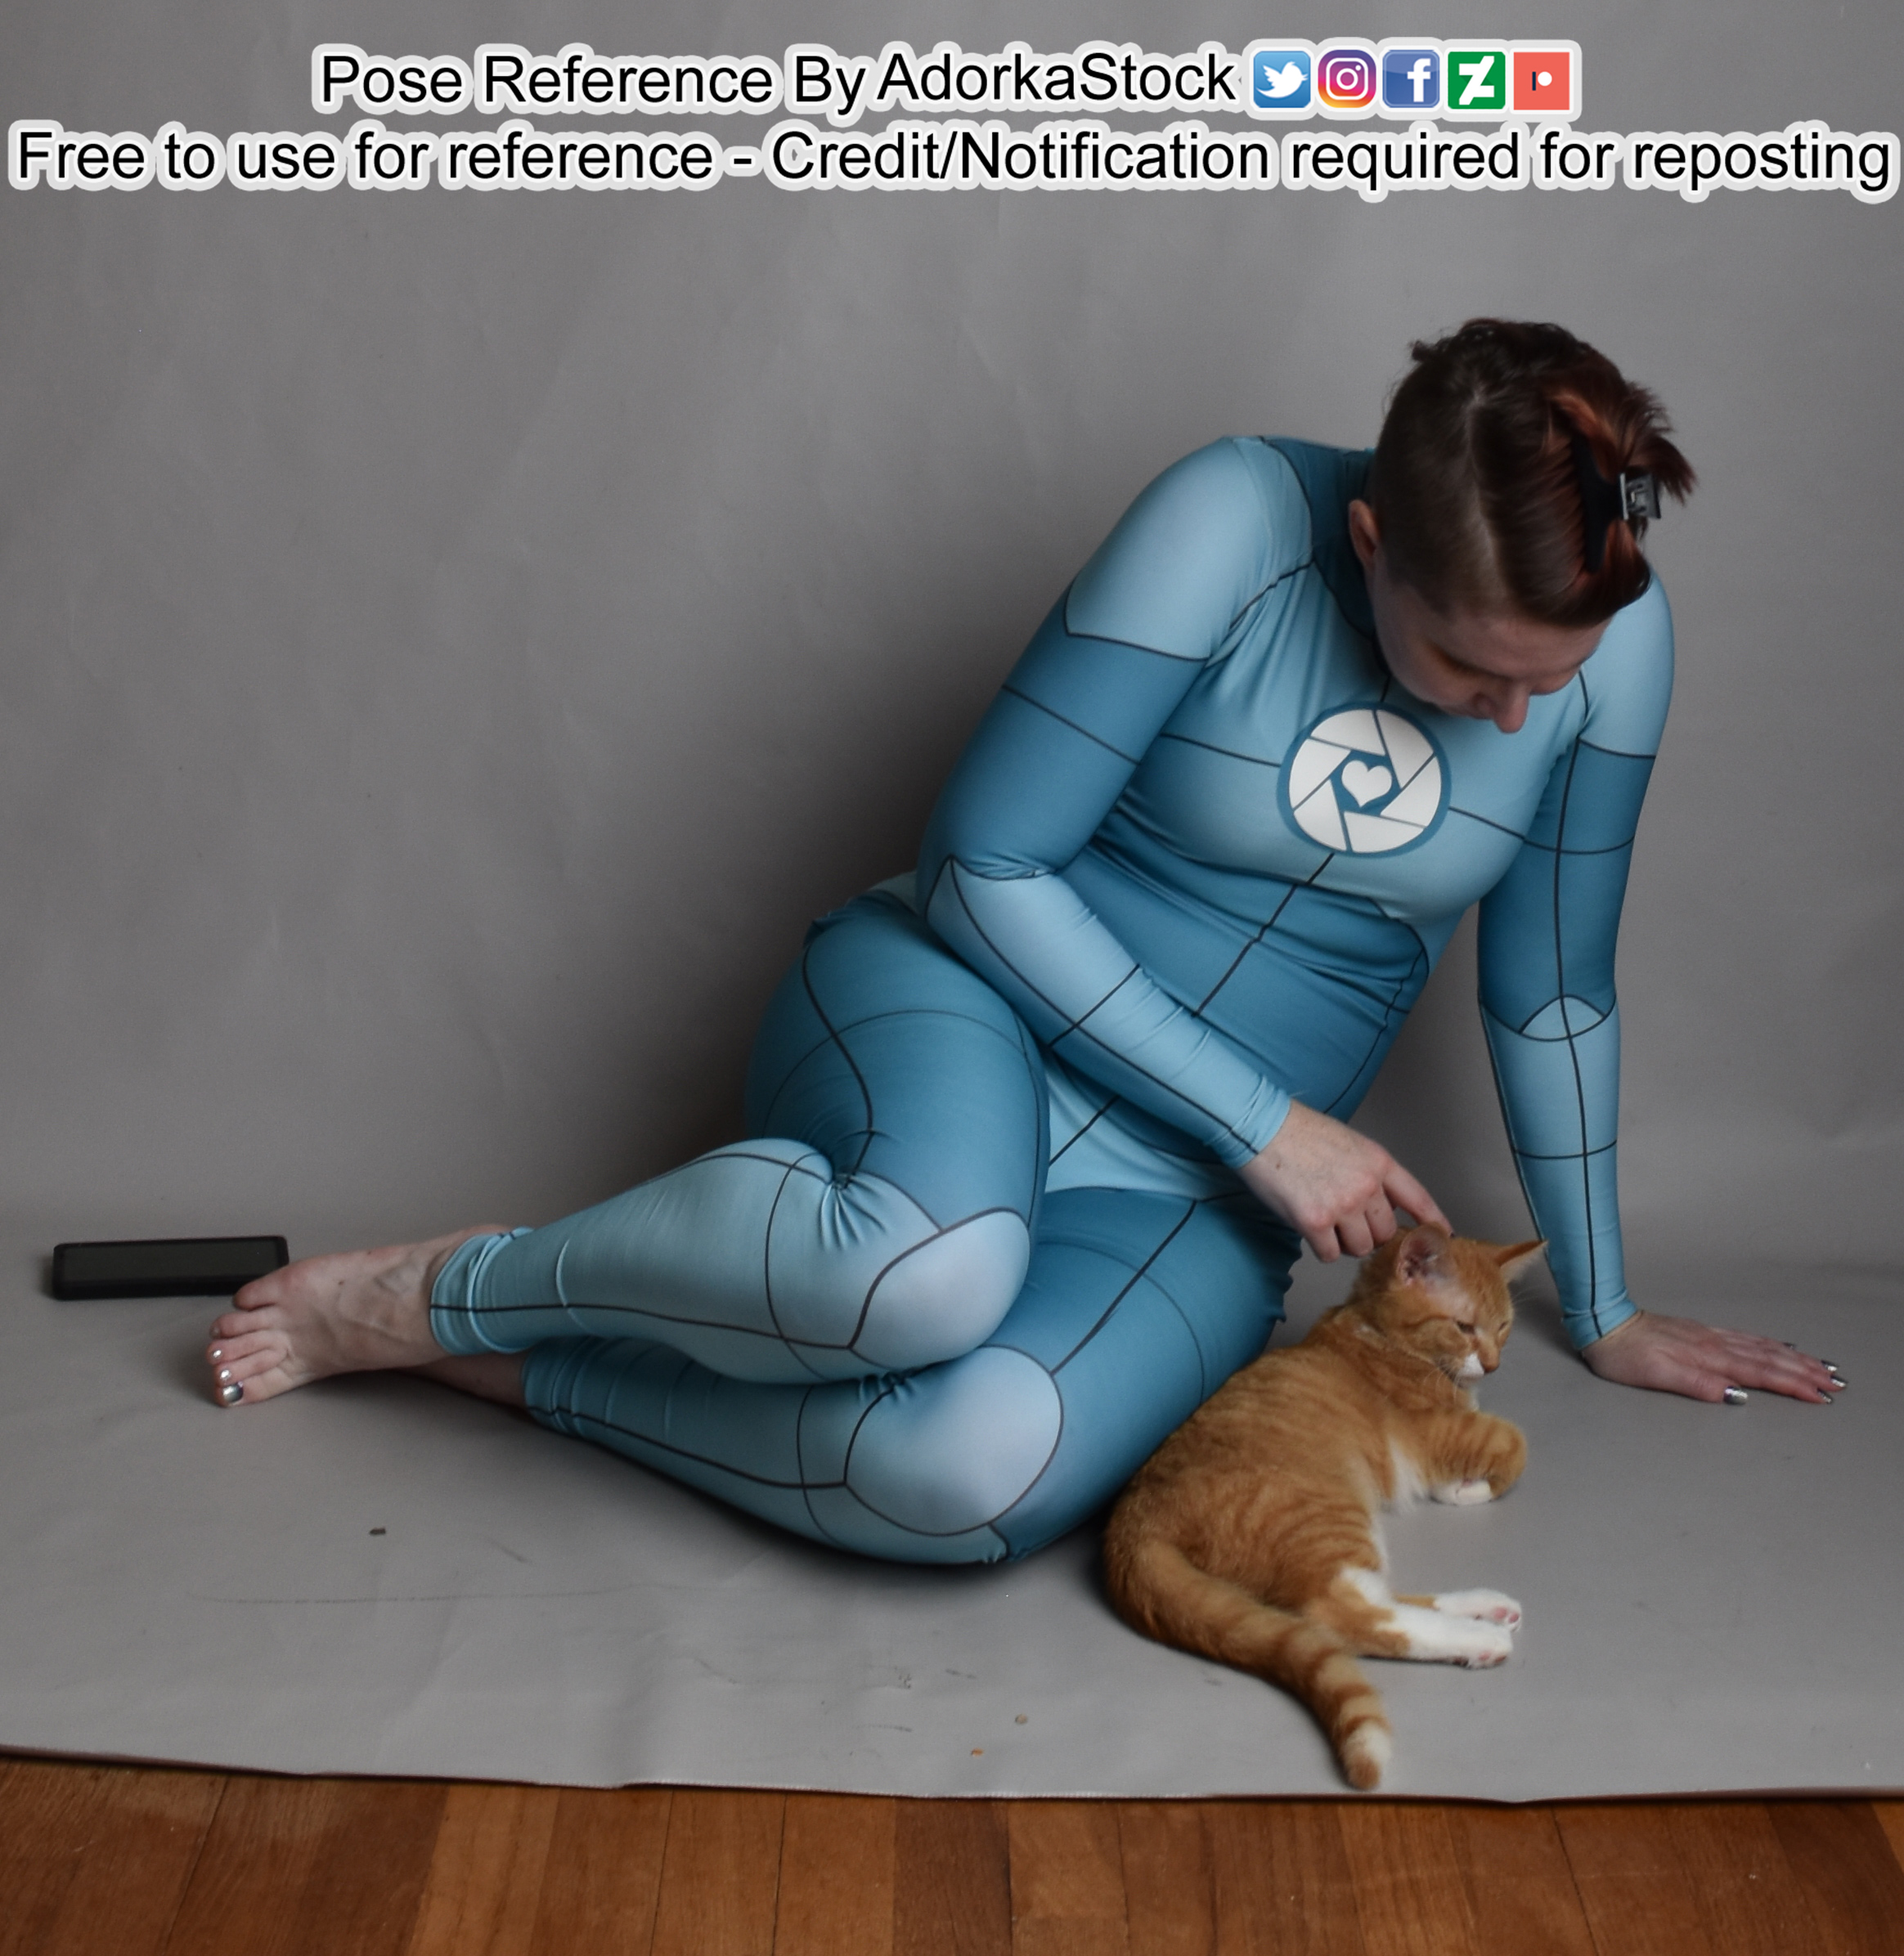 Thin, white, female pose reference model in sitting pose with grid suit. Beside her is a little orange kitten and she's looking down and petting it.